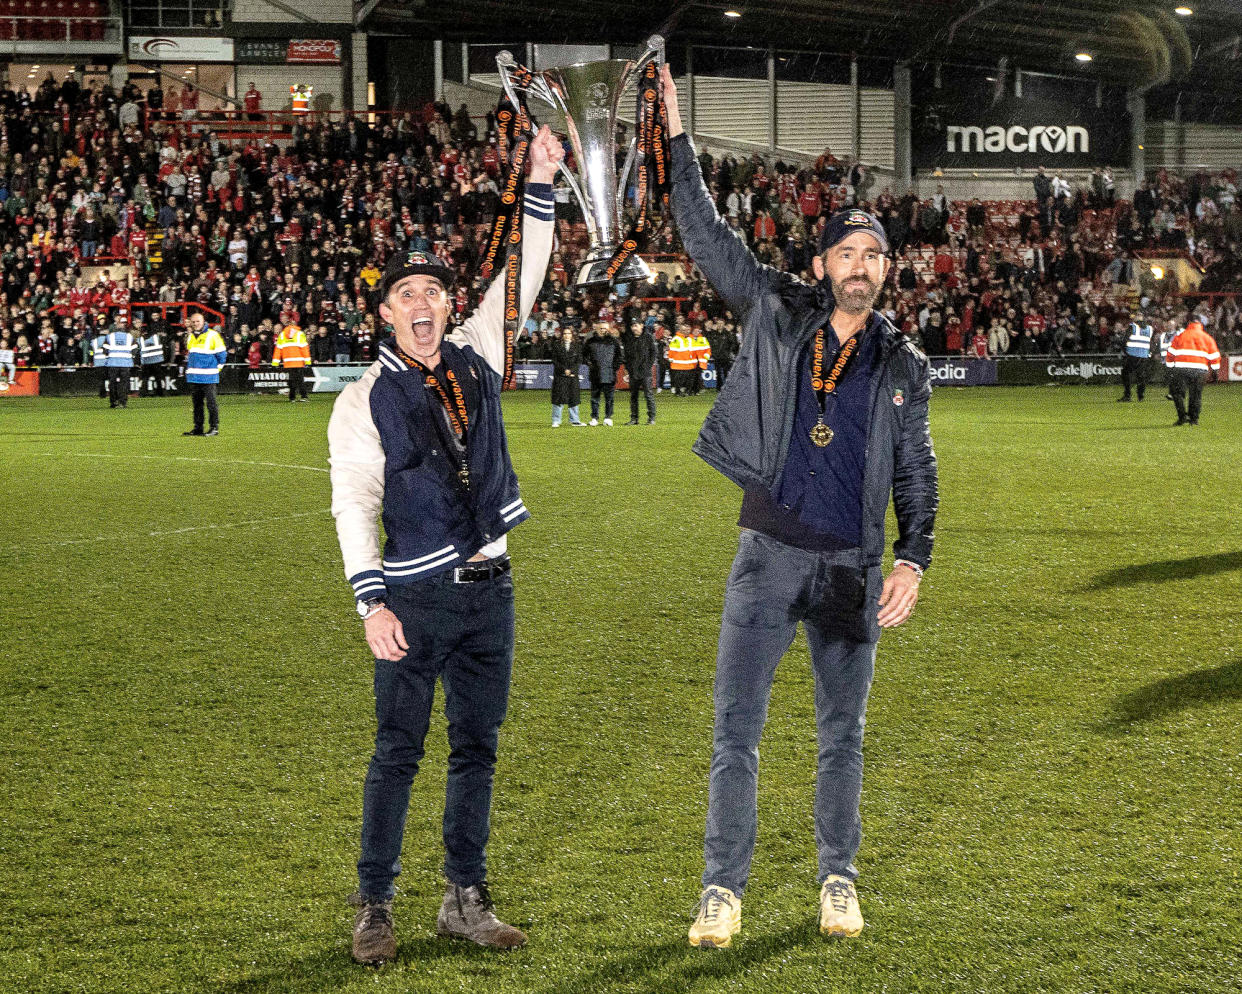 Ryan Reynolds and Rob McElhenney Get Emotional After Wrexham AFC Wins Promotion: 'I'm Still a Little Speechless'